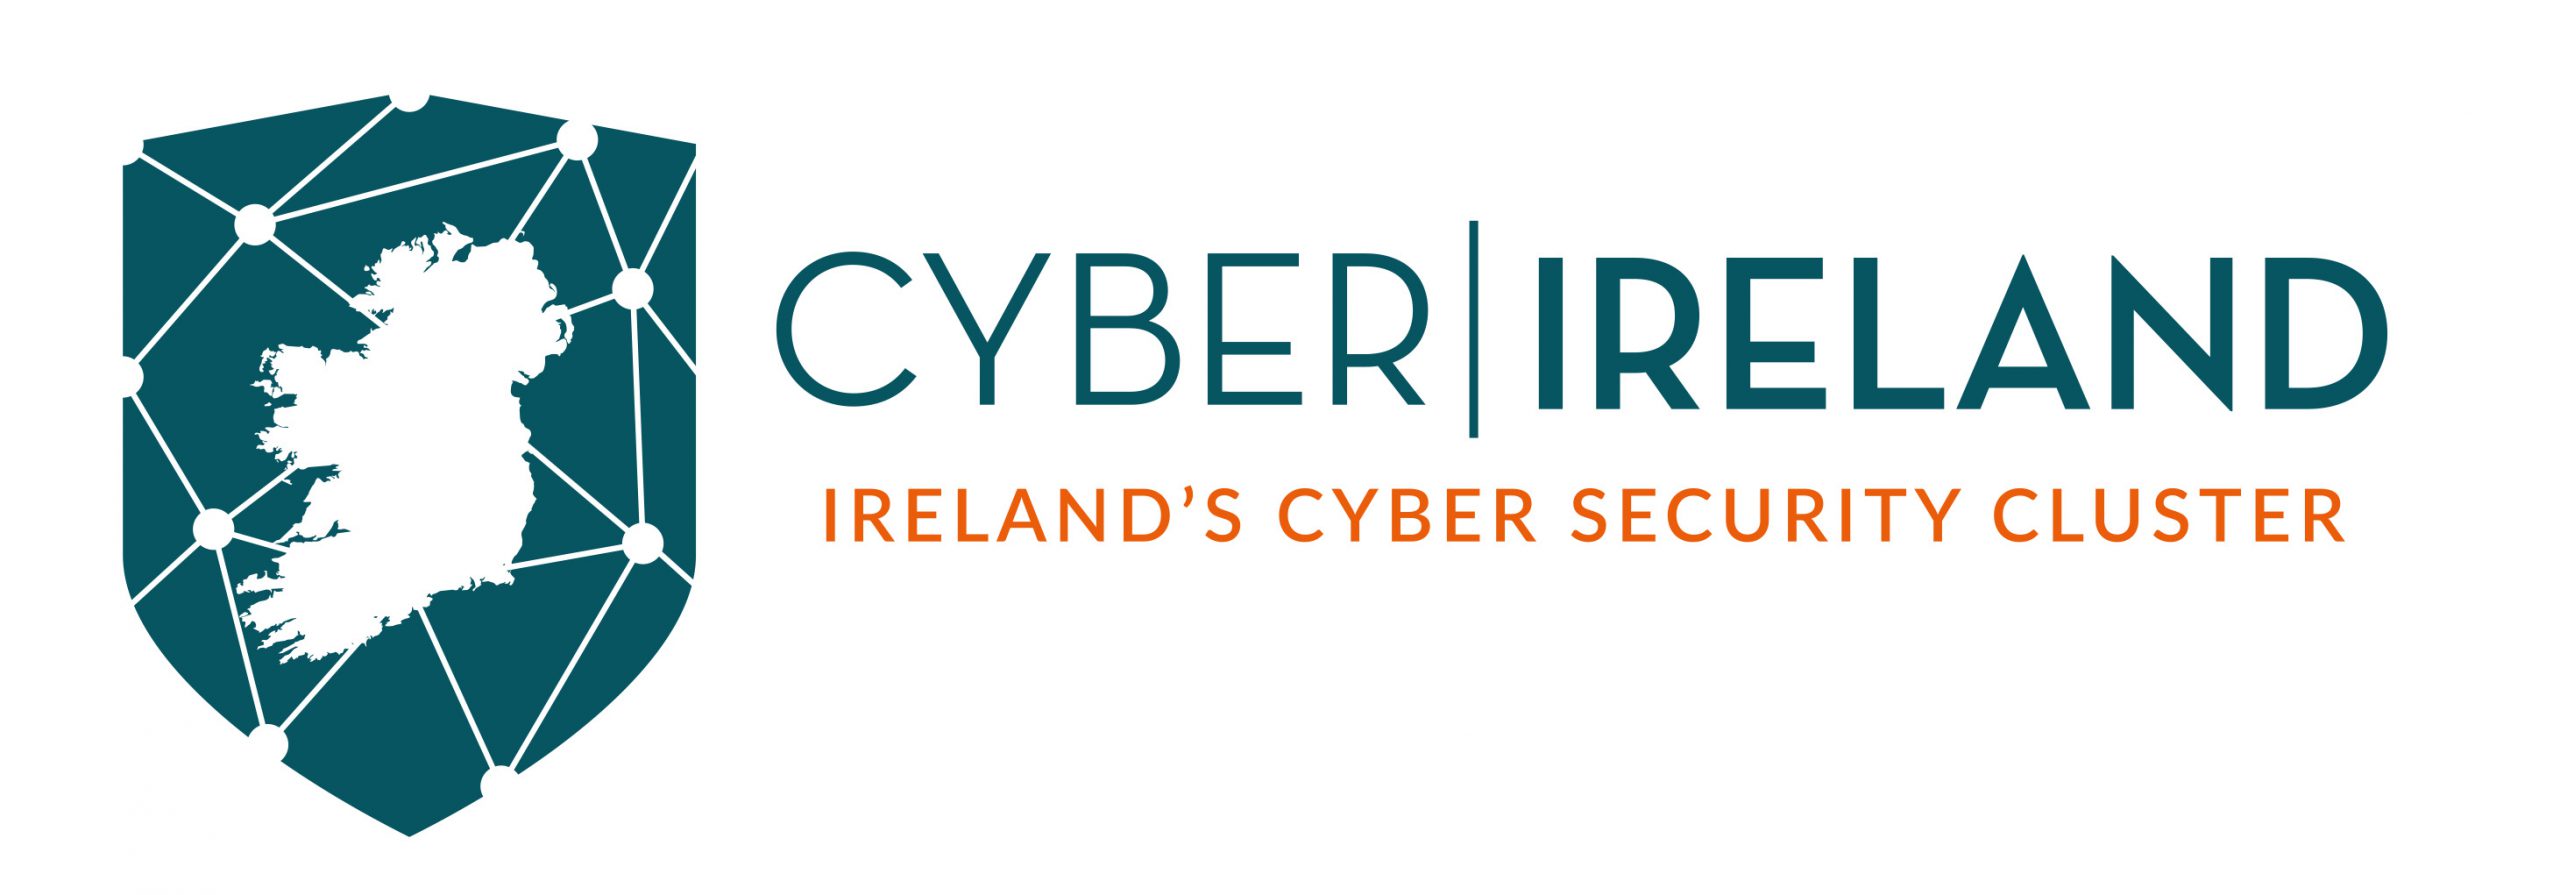 National Cyber Security Cluster 'Cyber Ireland' announced by IDA ...